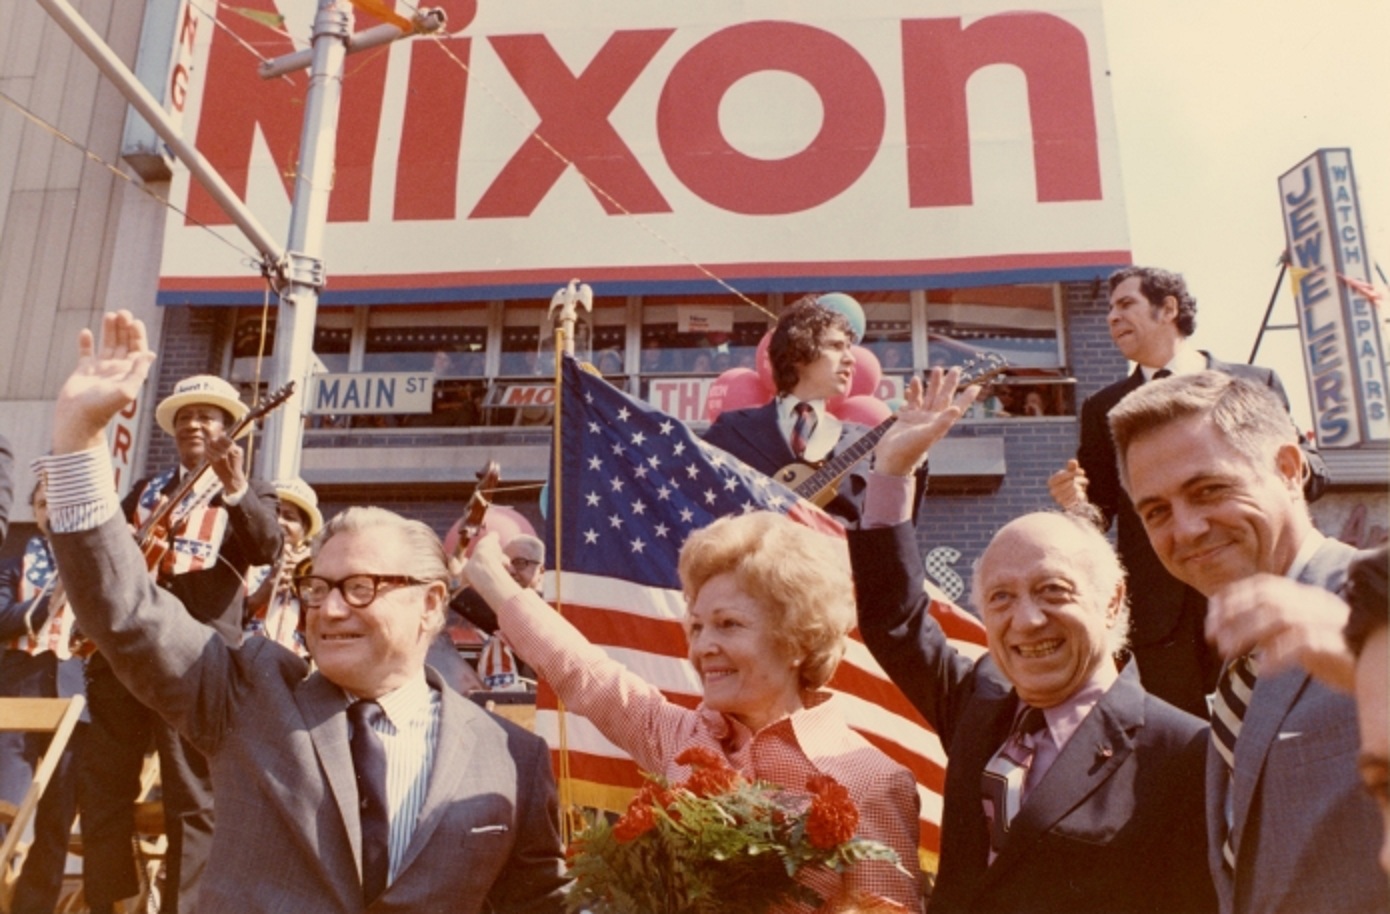 86. At a Nixon 1972 campaign rally on Main Street in Flushing, Queens, New York with Governor Nelson Rockefeller, and US Senators Jacob Javits and James Buckley.